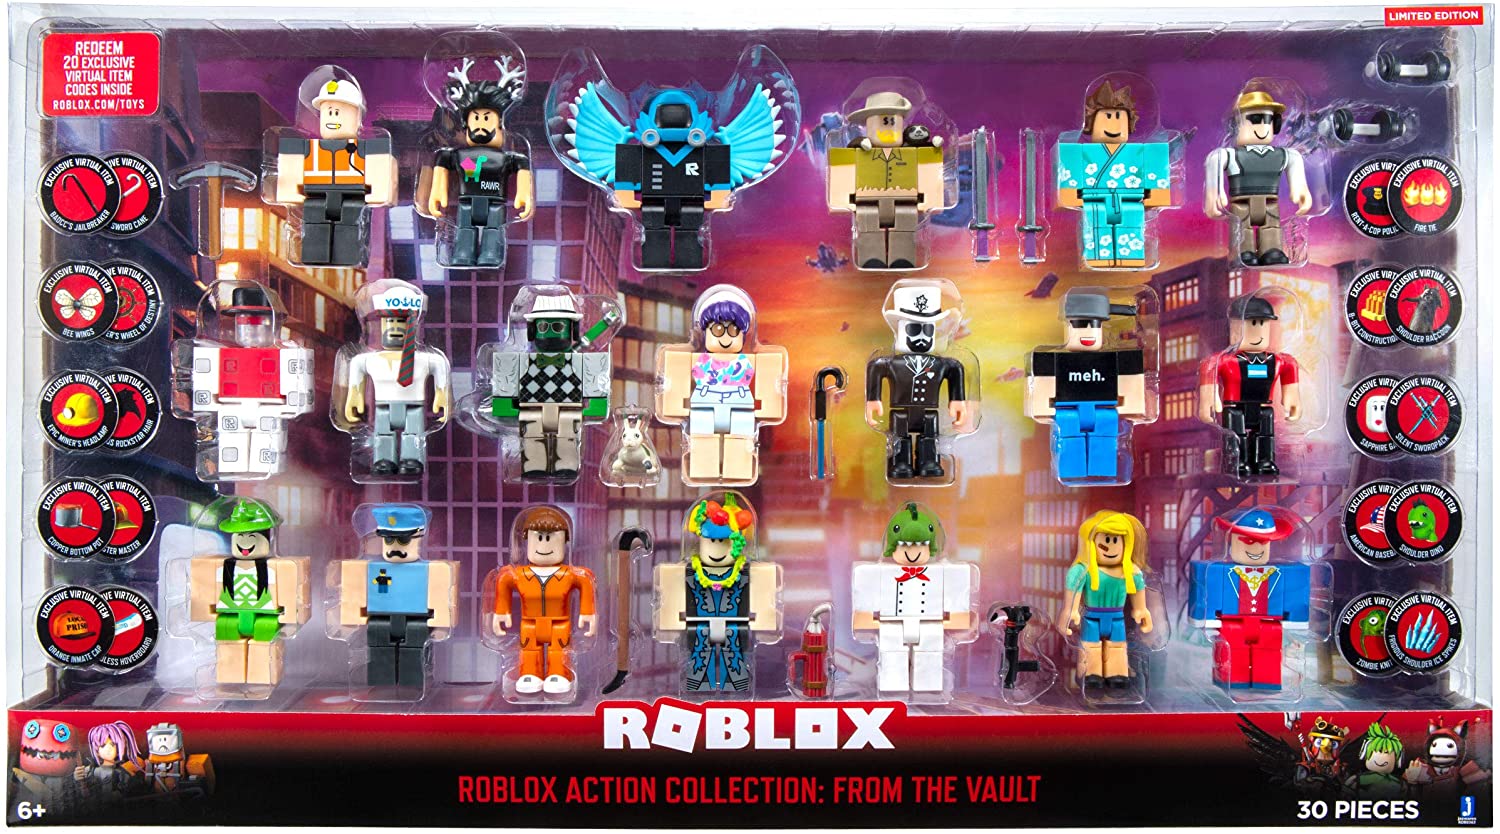 New Roblox Toys Coming Soon